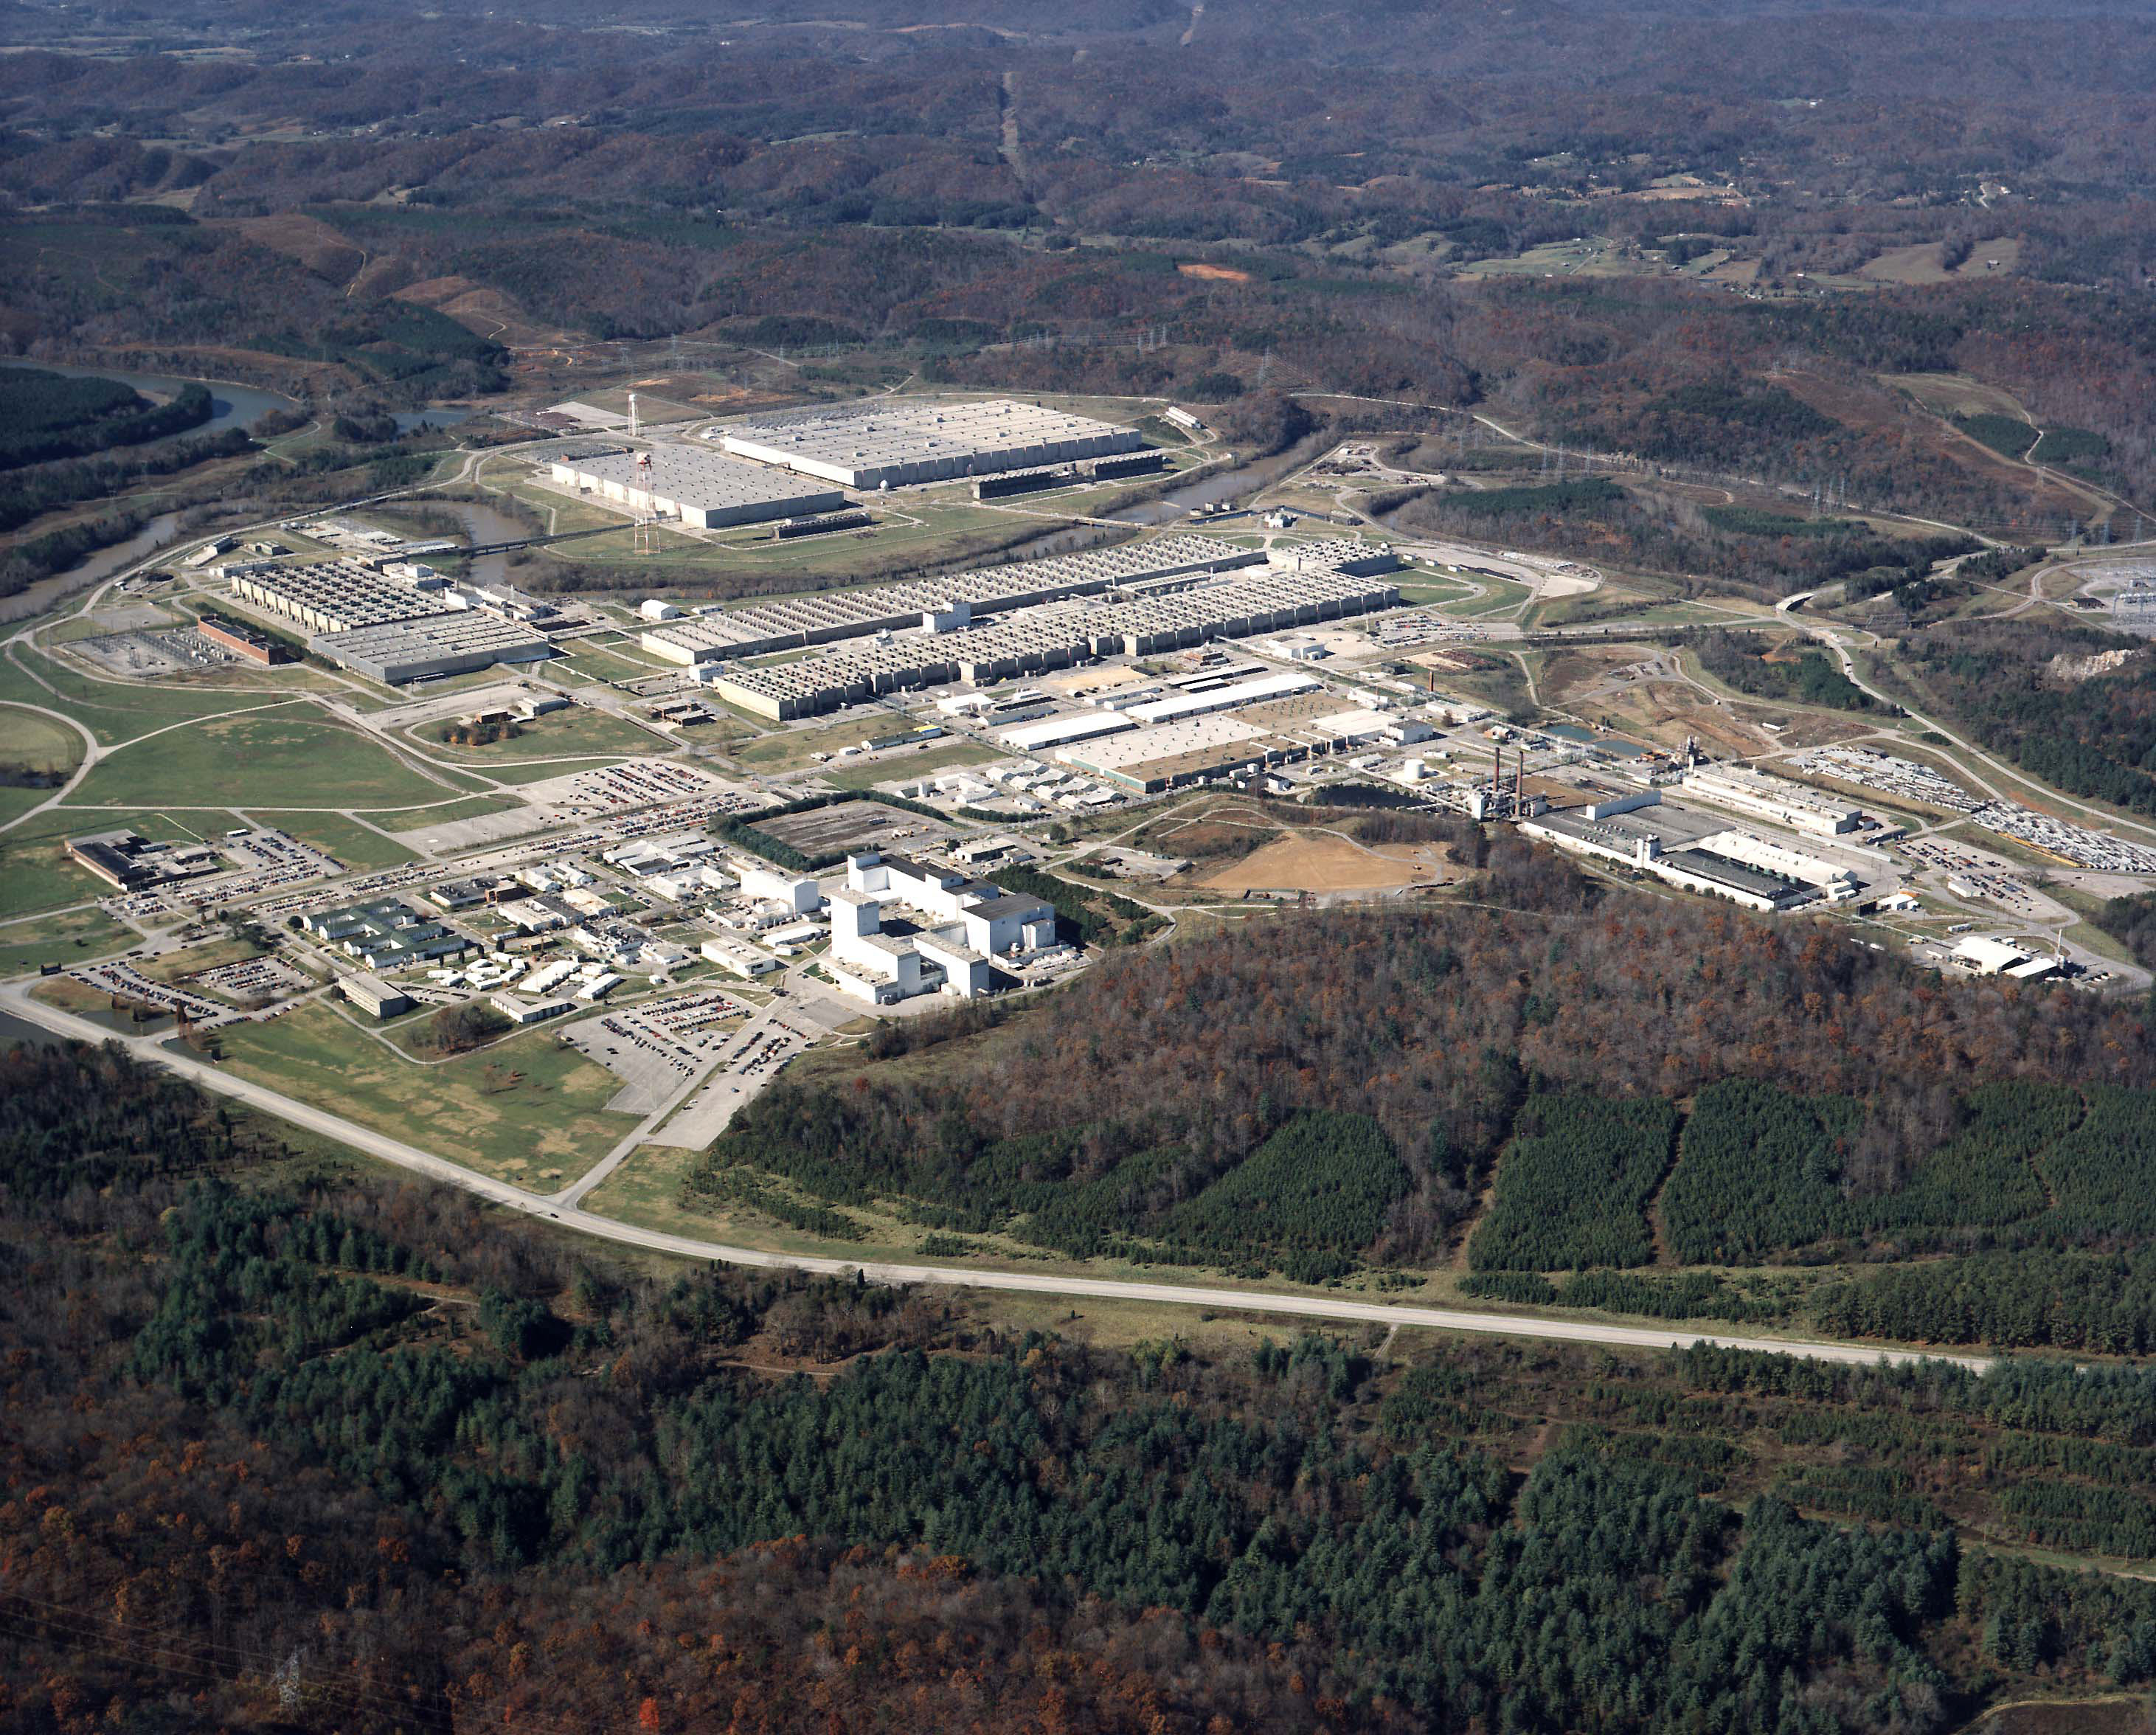 The US built a secret replica of Iran's nuclear facilities deep in Tennessee's forest to help gain an edge in negotiations